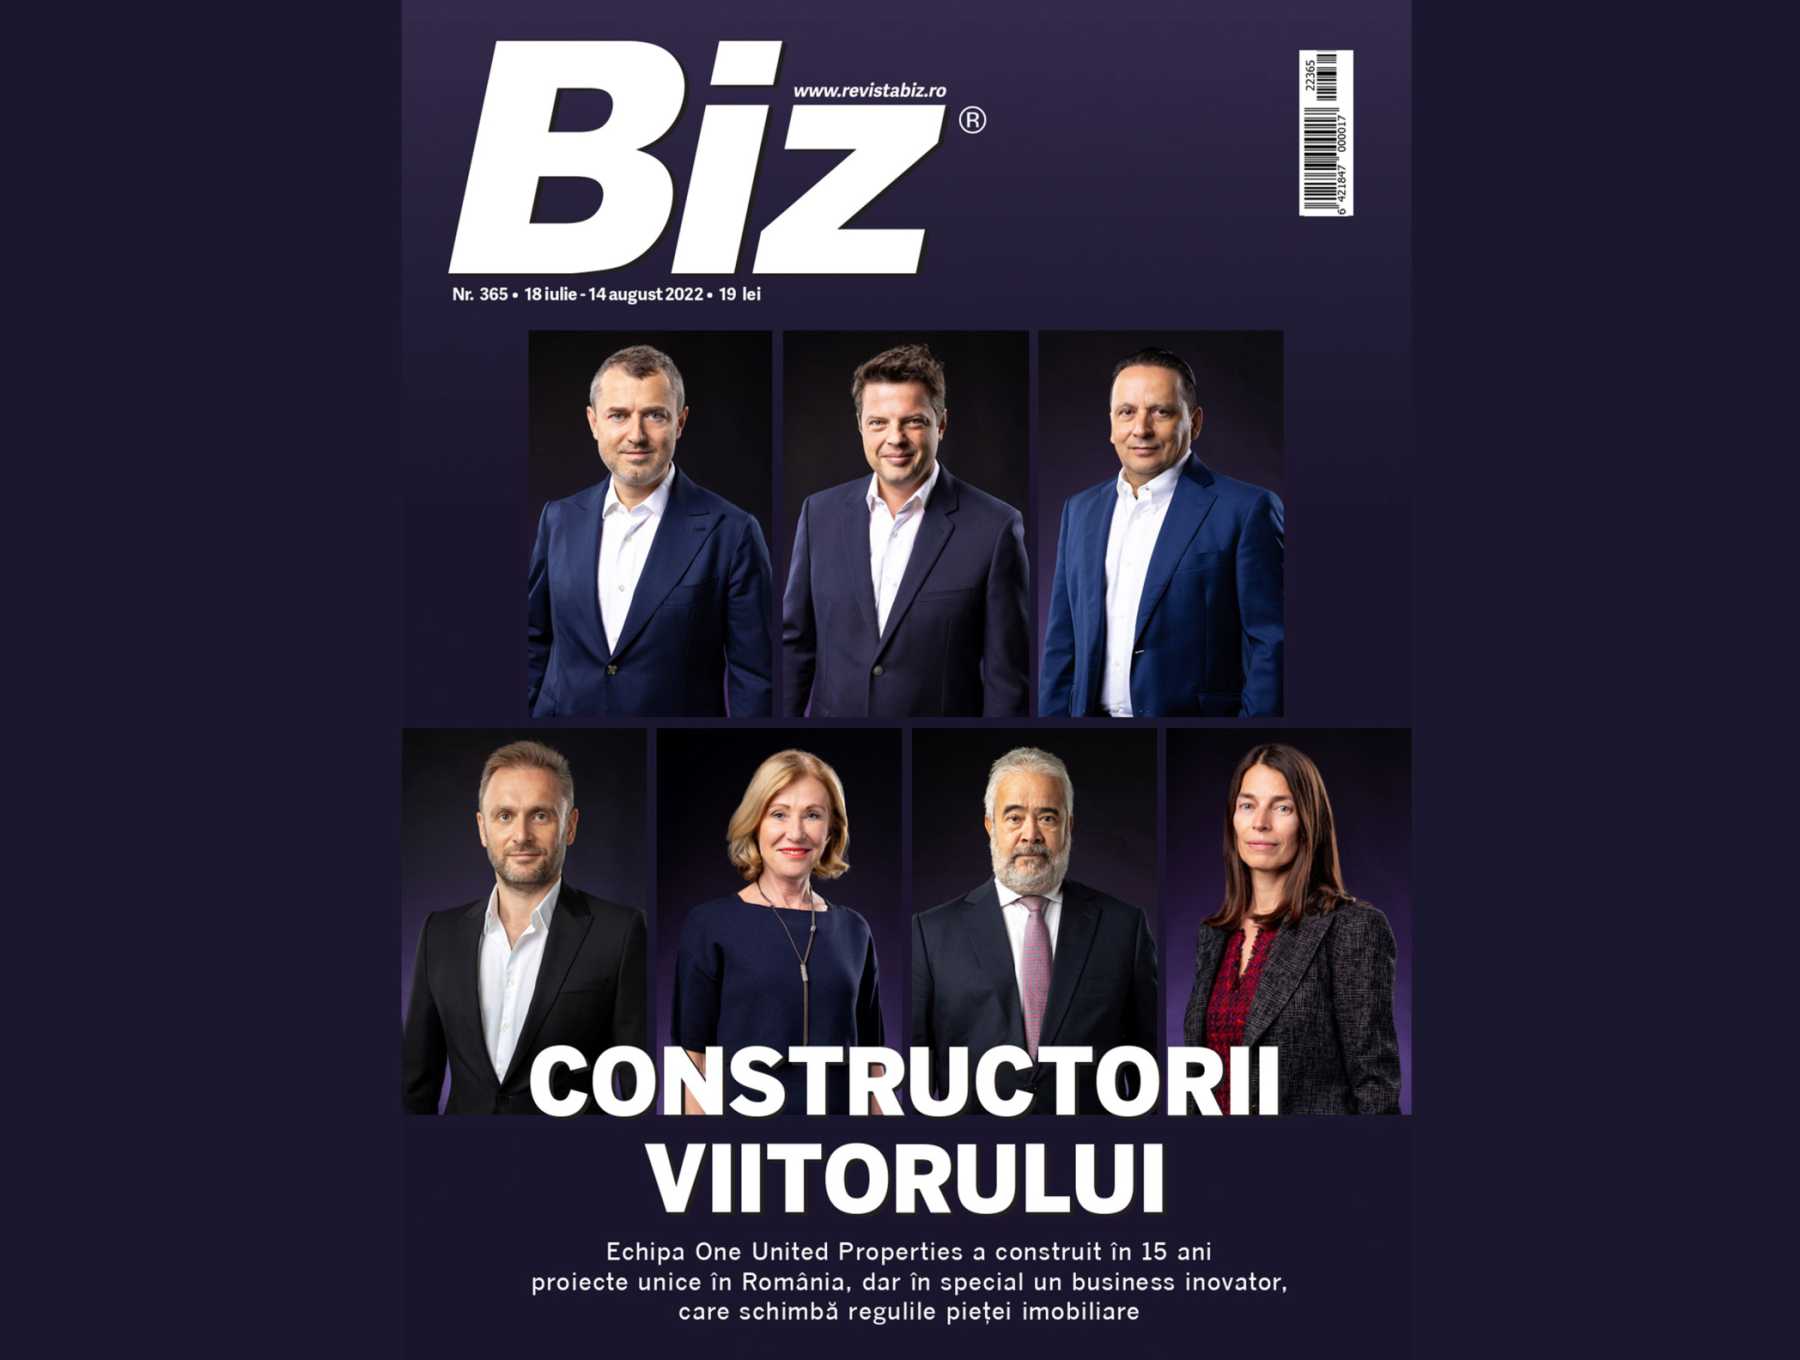 The One United Properties board, on the cover of Biz magazine